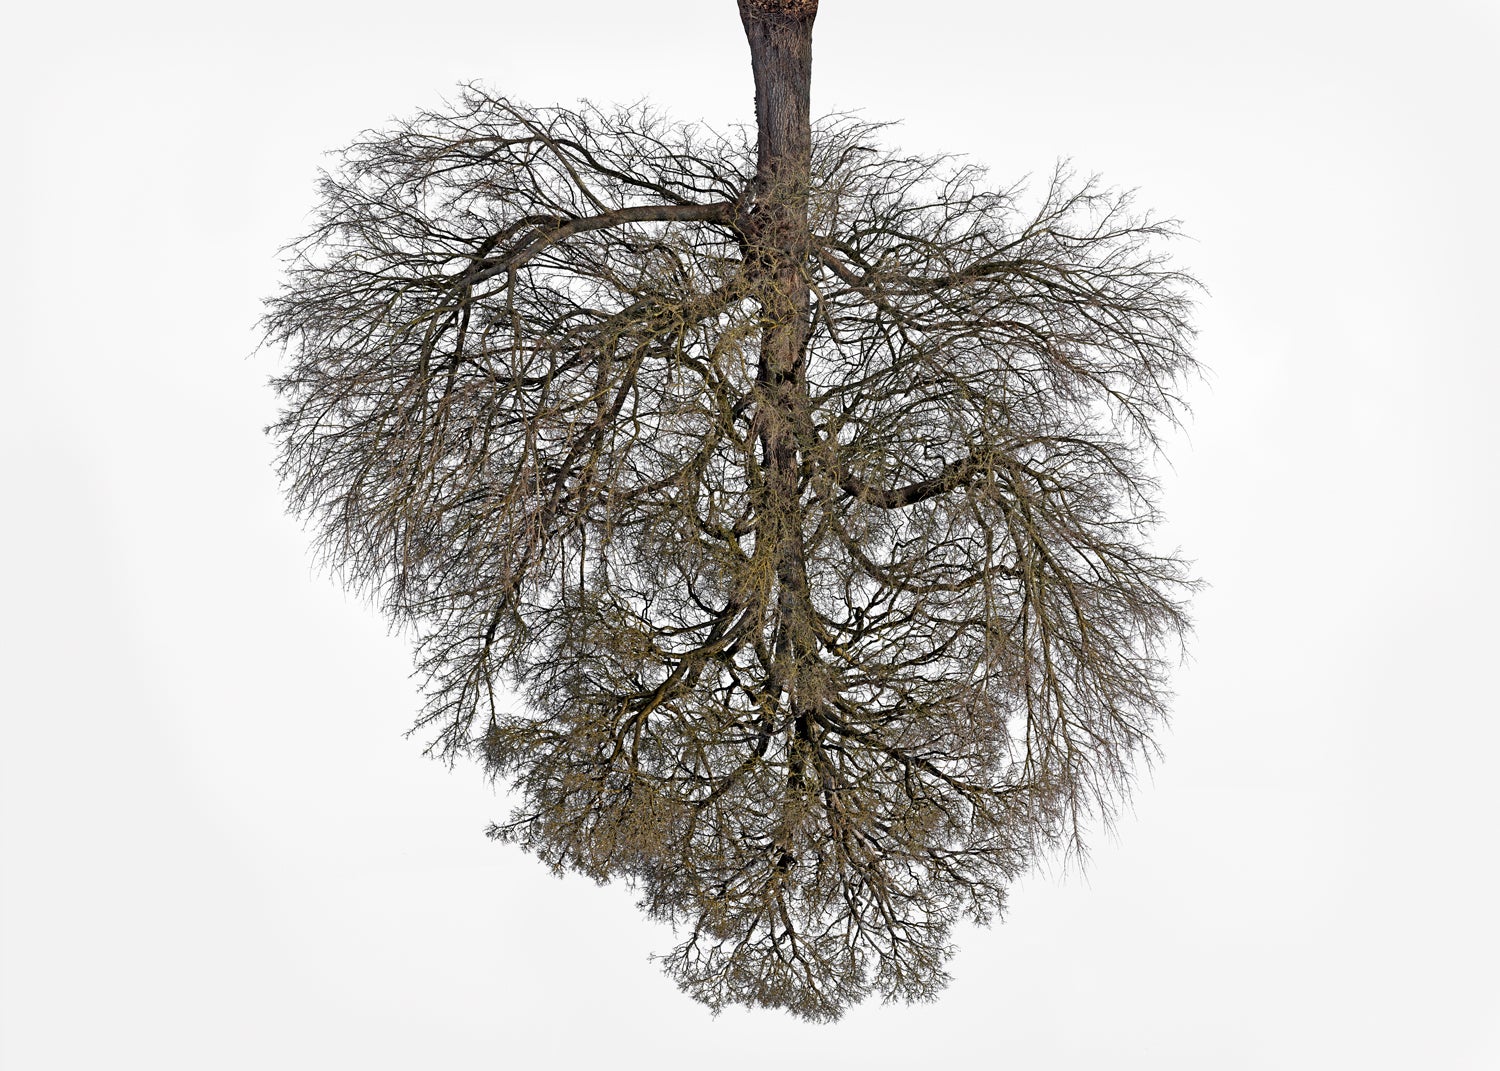 warmtree, This one is just a different angle to Treestreet …